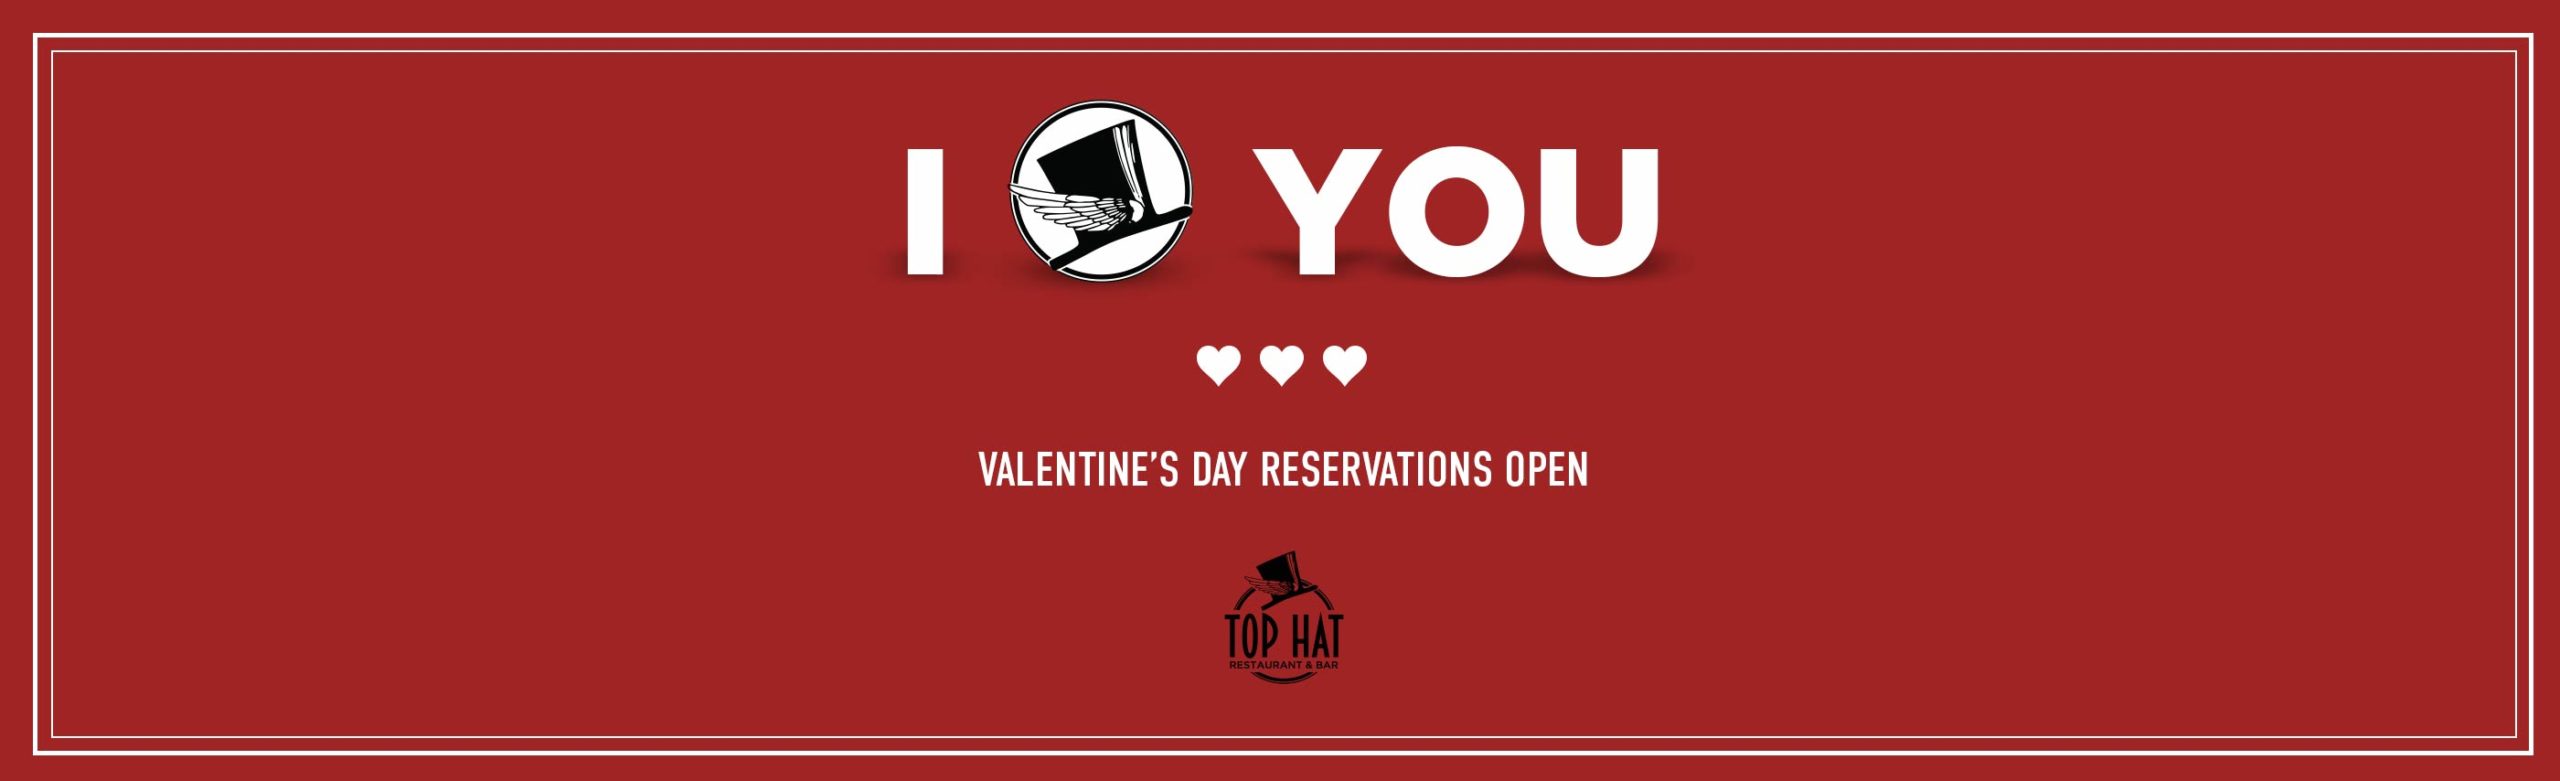 Now Accepting Valentine’s Day Reservations at the Top Hat Image